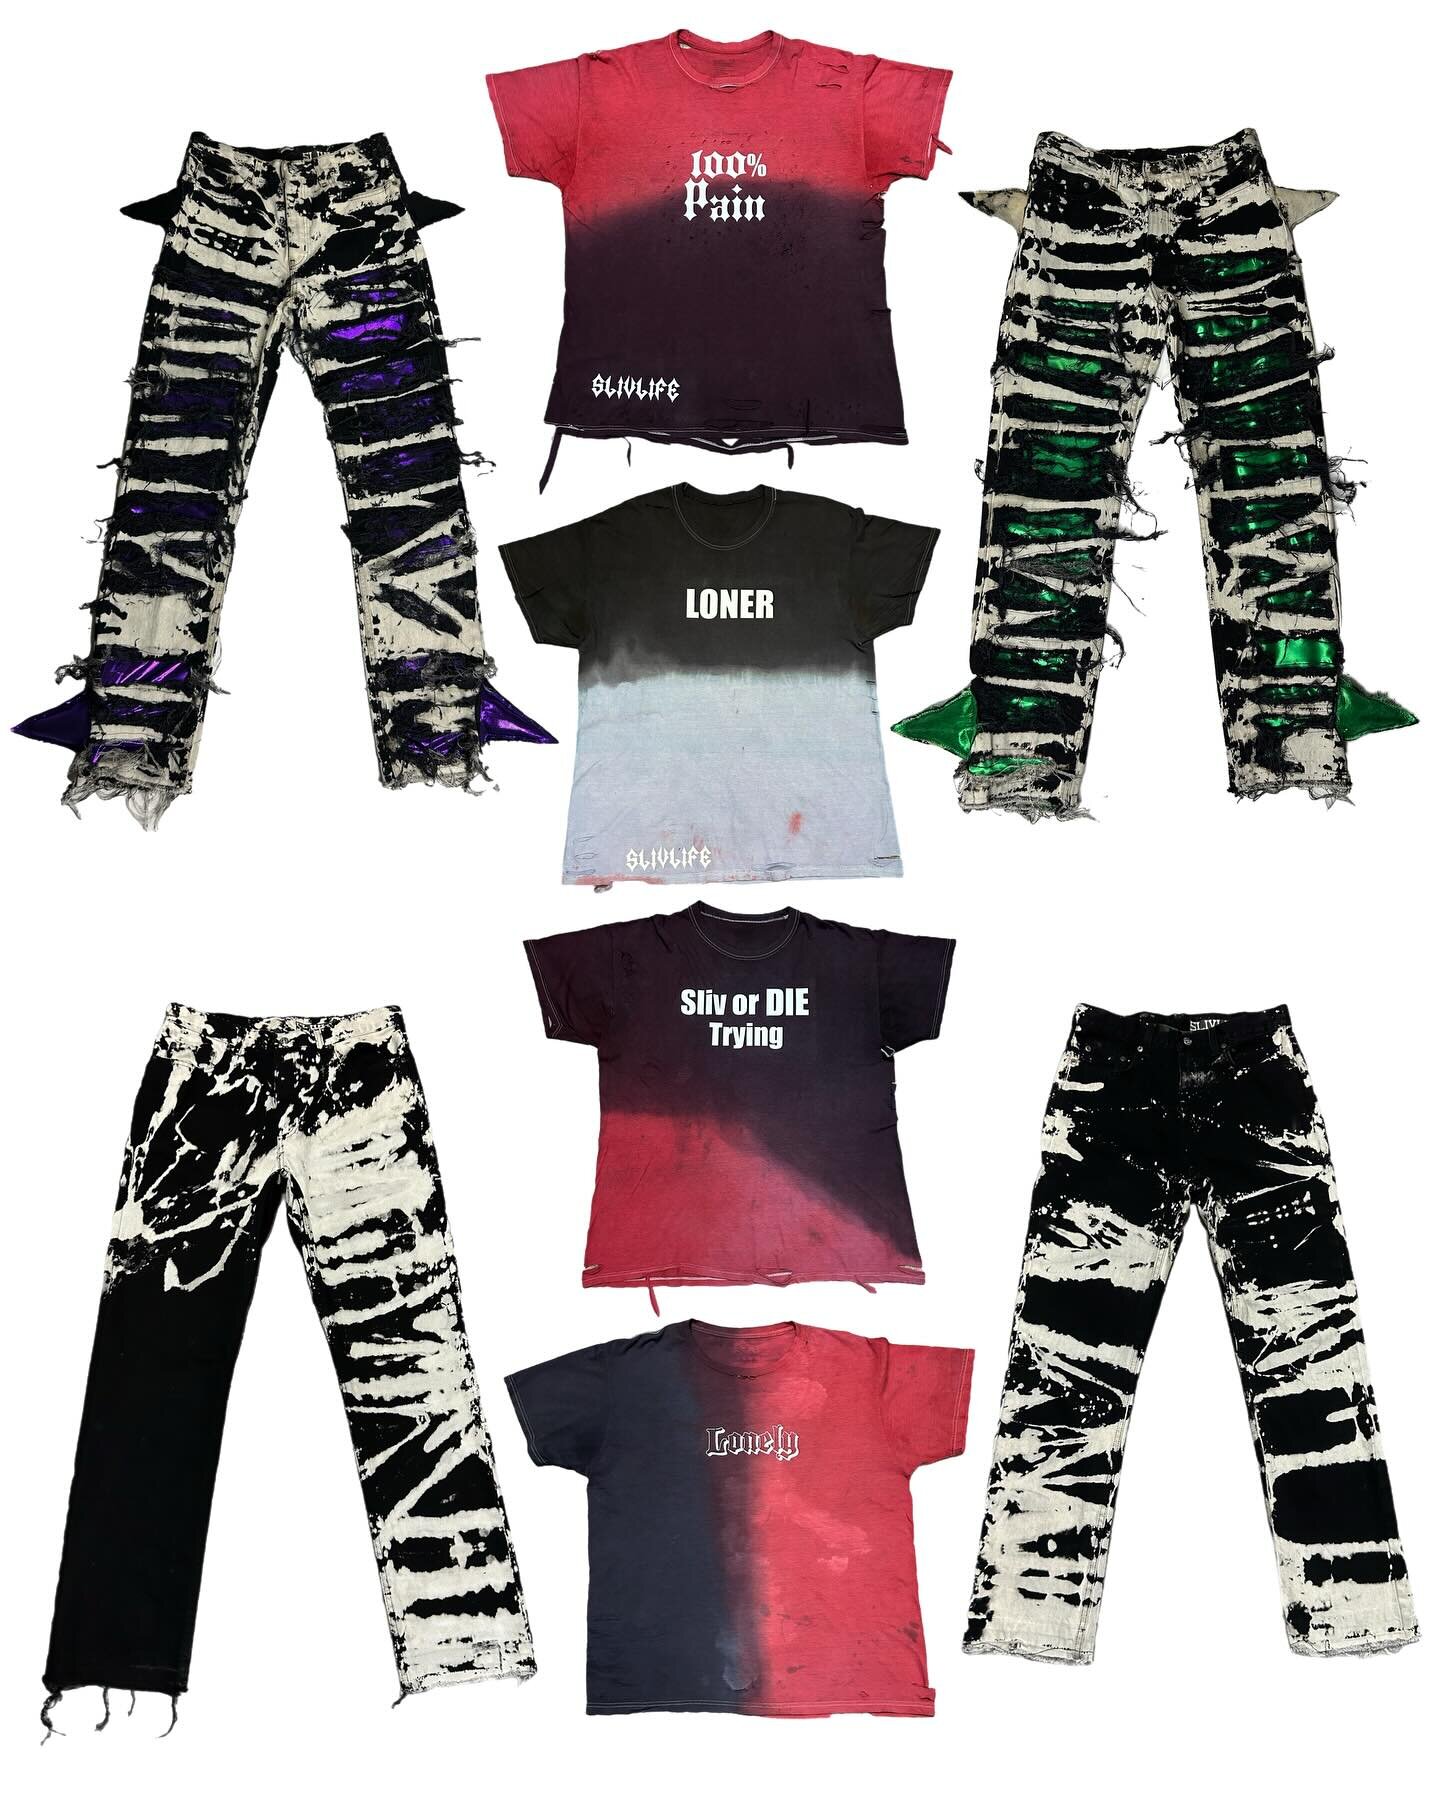 First drop of 2024 available now on my website! 100% pain self expressions through my clothing! 💯☠️

Very proud of this collection all handmade 1 of 1! You can order side spiked denim in your size with or without the spikes! 

4 shirts are 1 of 1. B